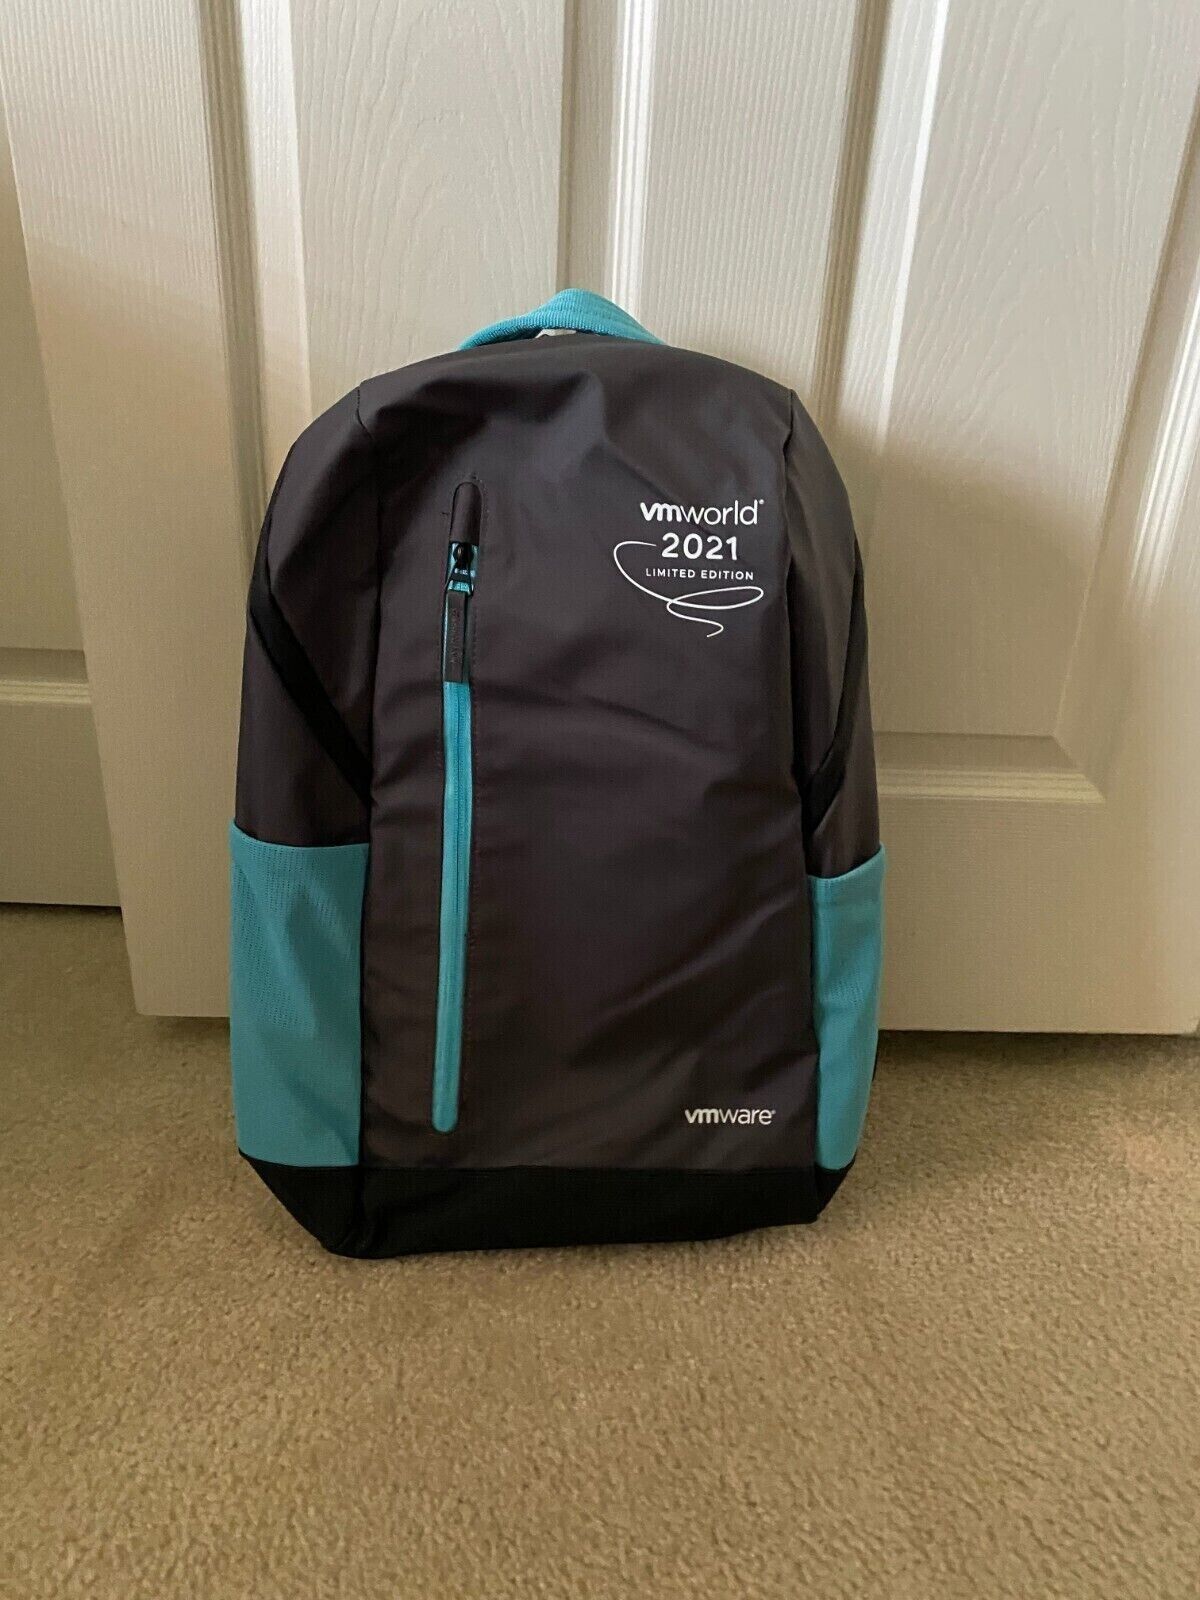 VMworld 2021 Limited Edition Backpack *New* 